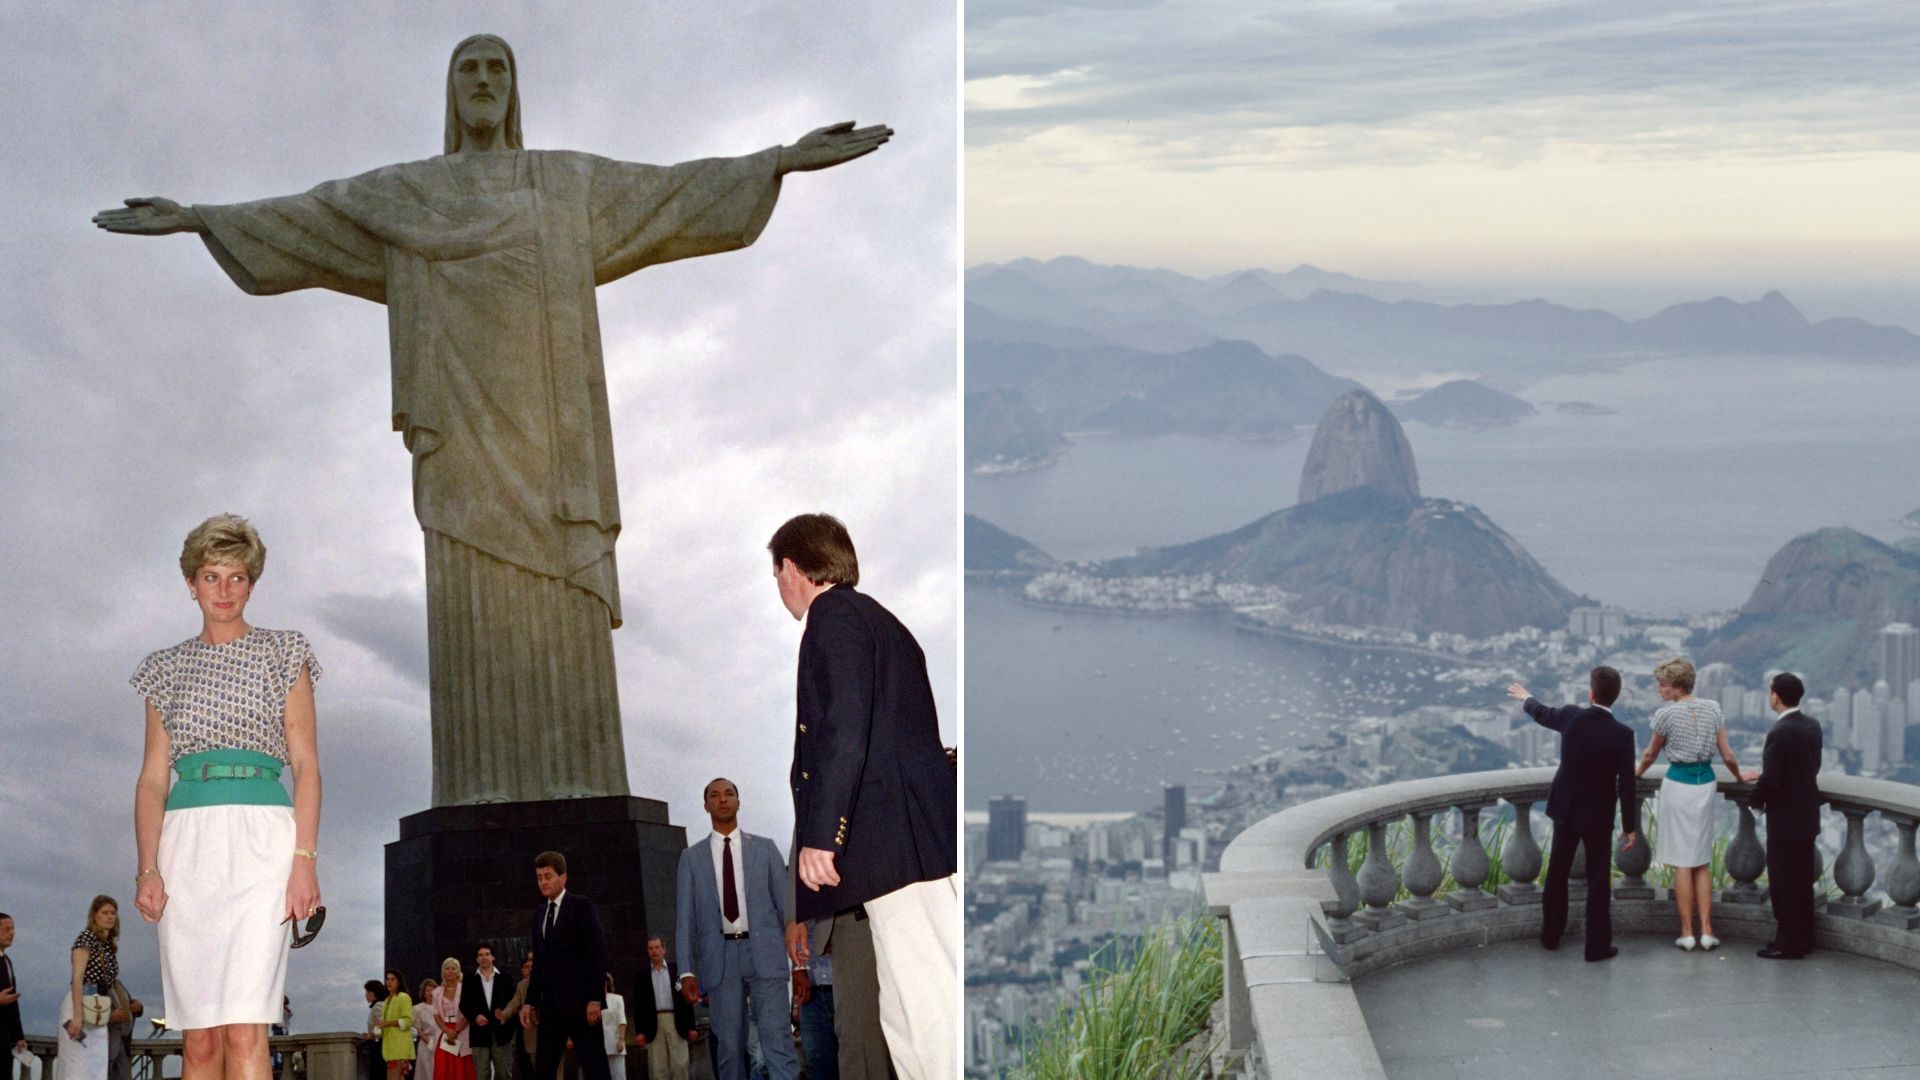 <p>                     As part of a trip to Rio in 1991, Diana became just like any other tourist milling around and managed to get a quick snap of her standing in front of the iconic Christ the Redeemer statue that watches over the city. The princess visited several hospitals caring for abandoned street children and was given a rose by a little girl as she left her Rio hotel.                    </p>